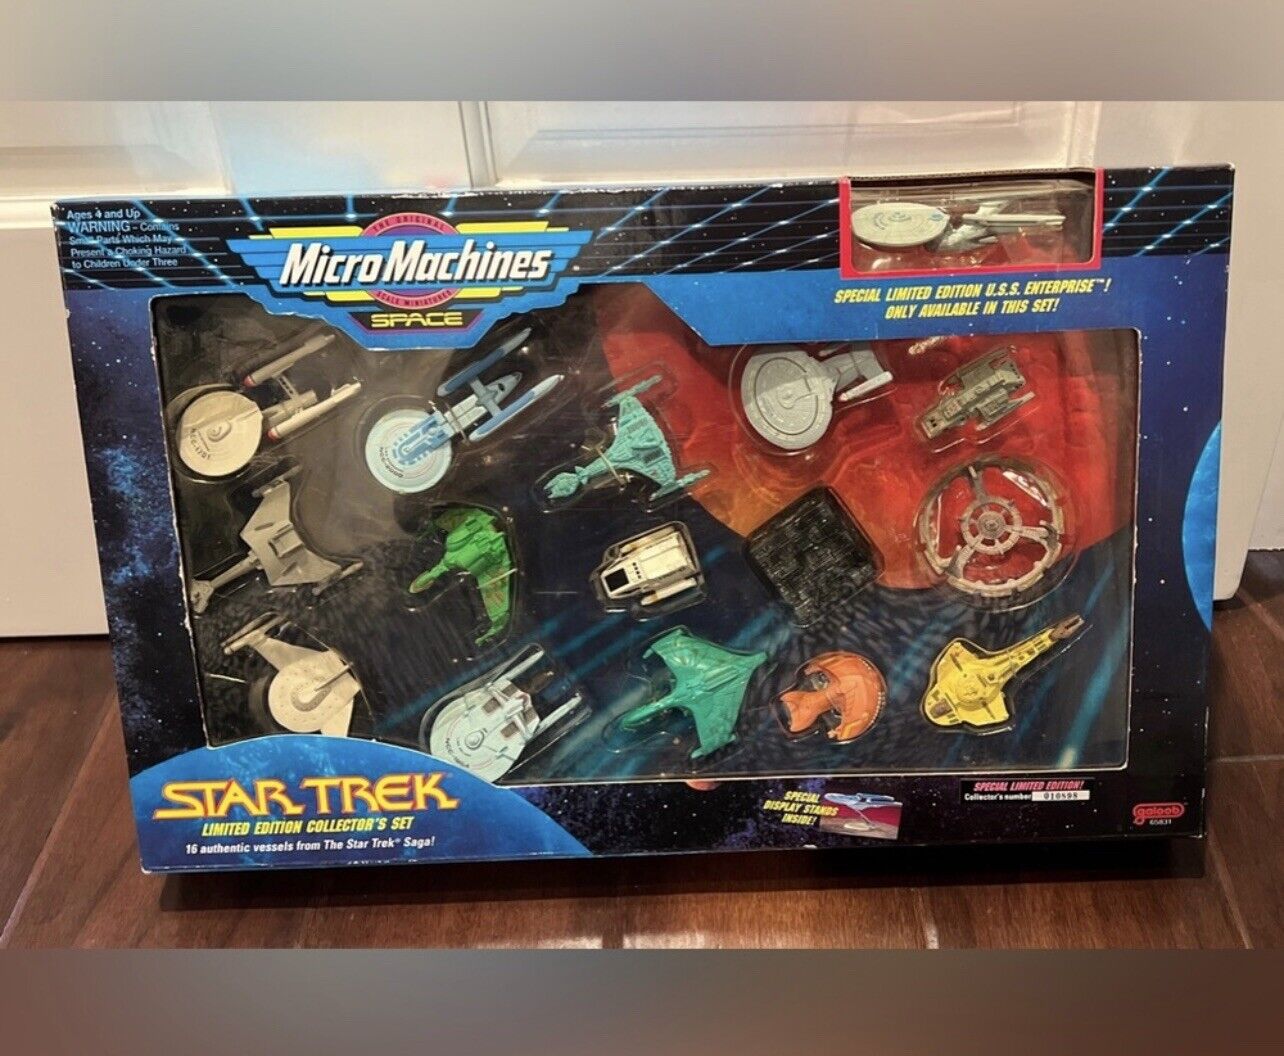 1993 Galoob Micro Machines Space Star Trek Limited Edition Collector's Set